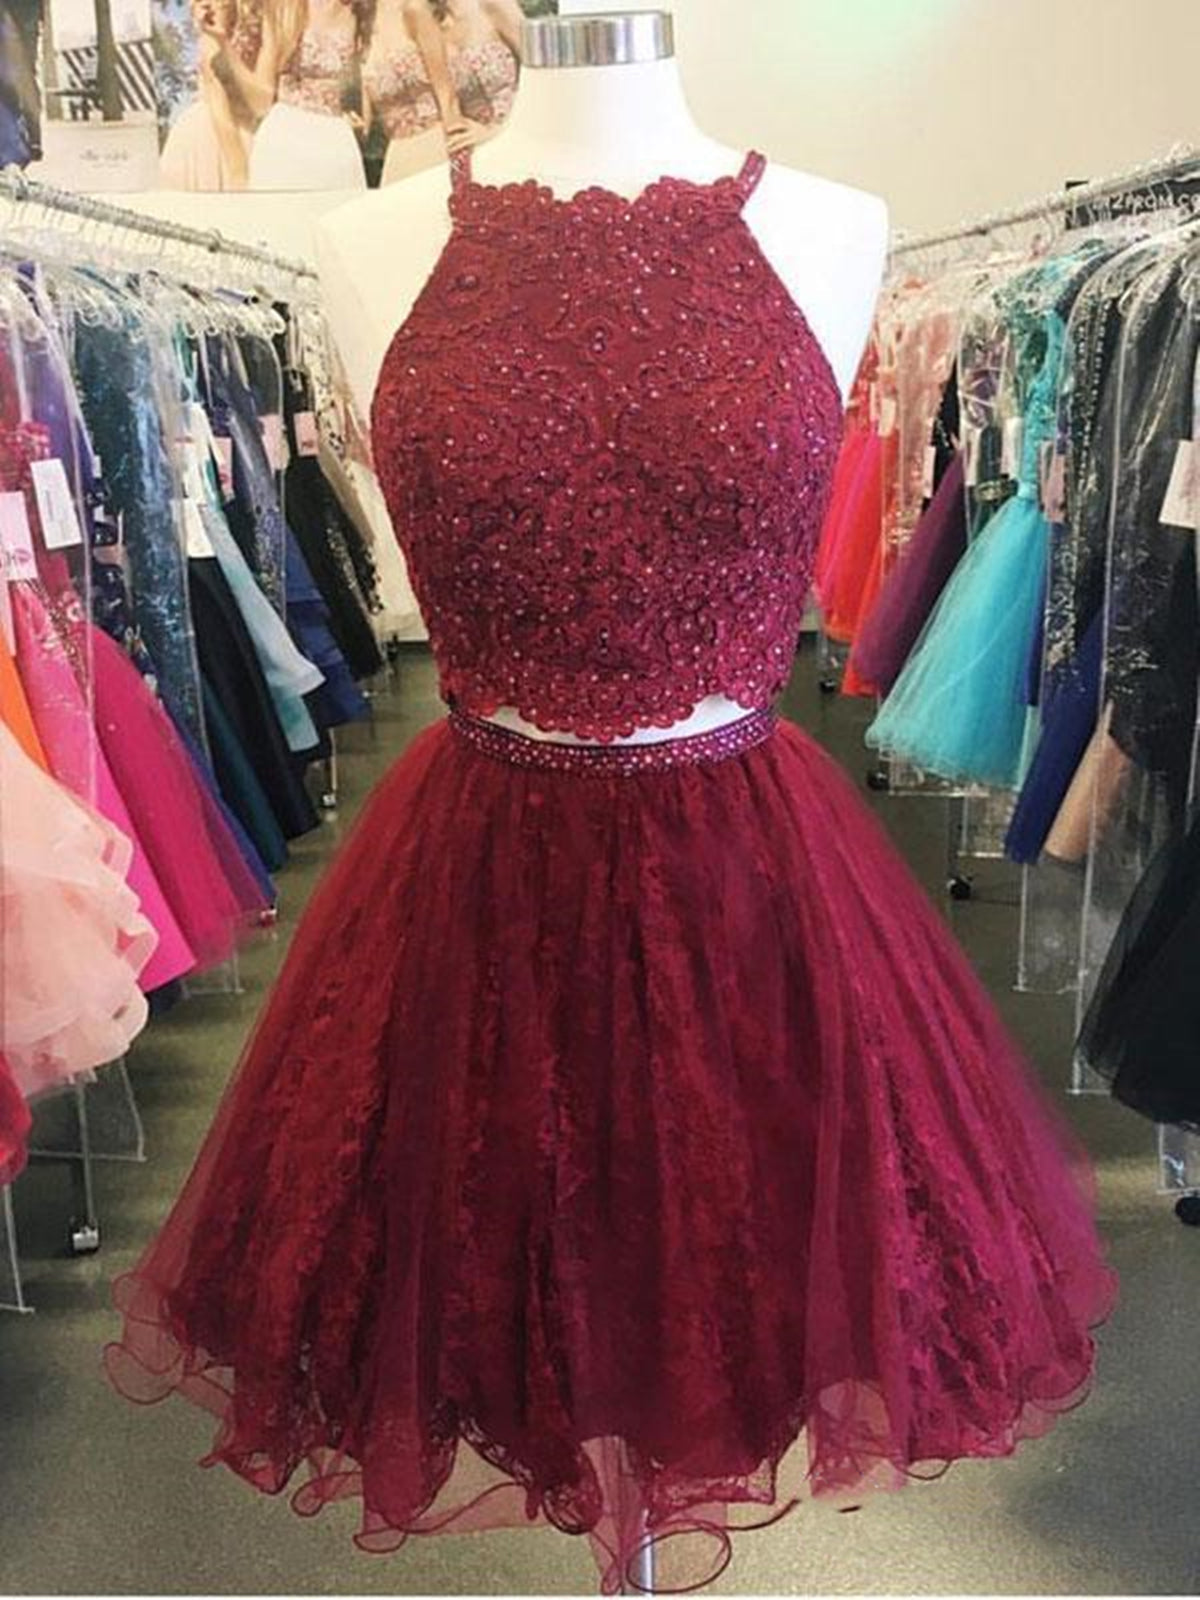 Formal Dresses Prom, Two Pieces Short Burgundy Lace Prom Dresses, Wine Red 2 Pieces Short Lace Formal Homecoming Dresses